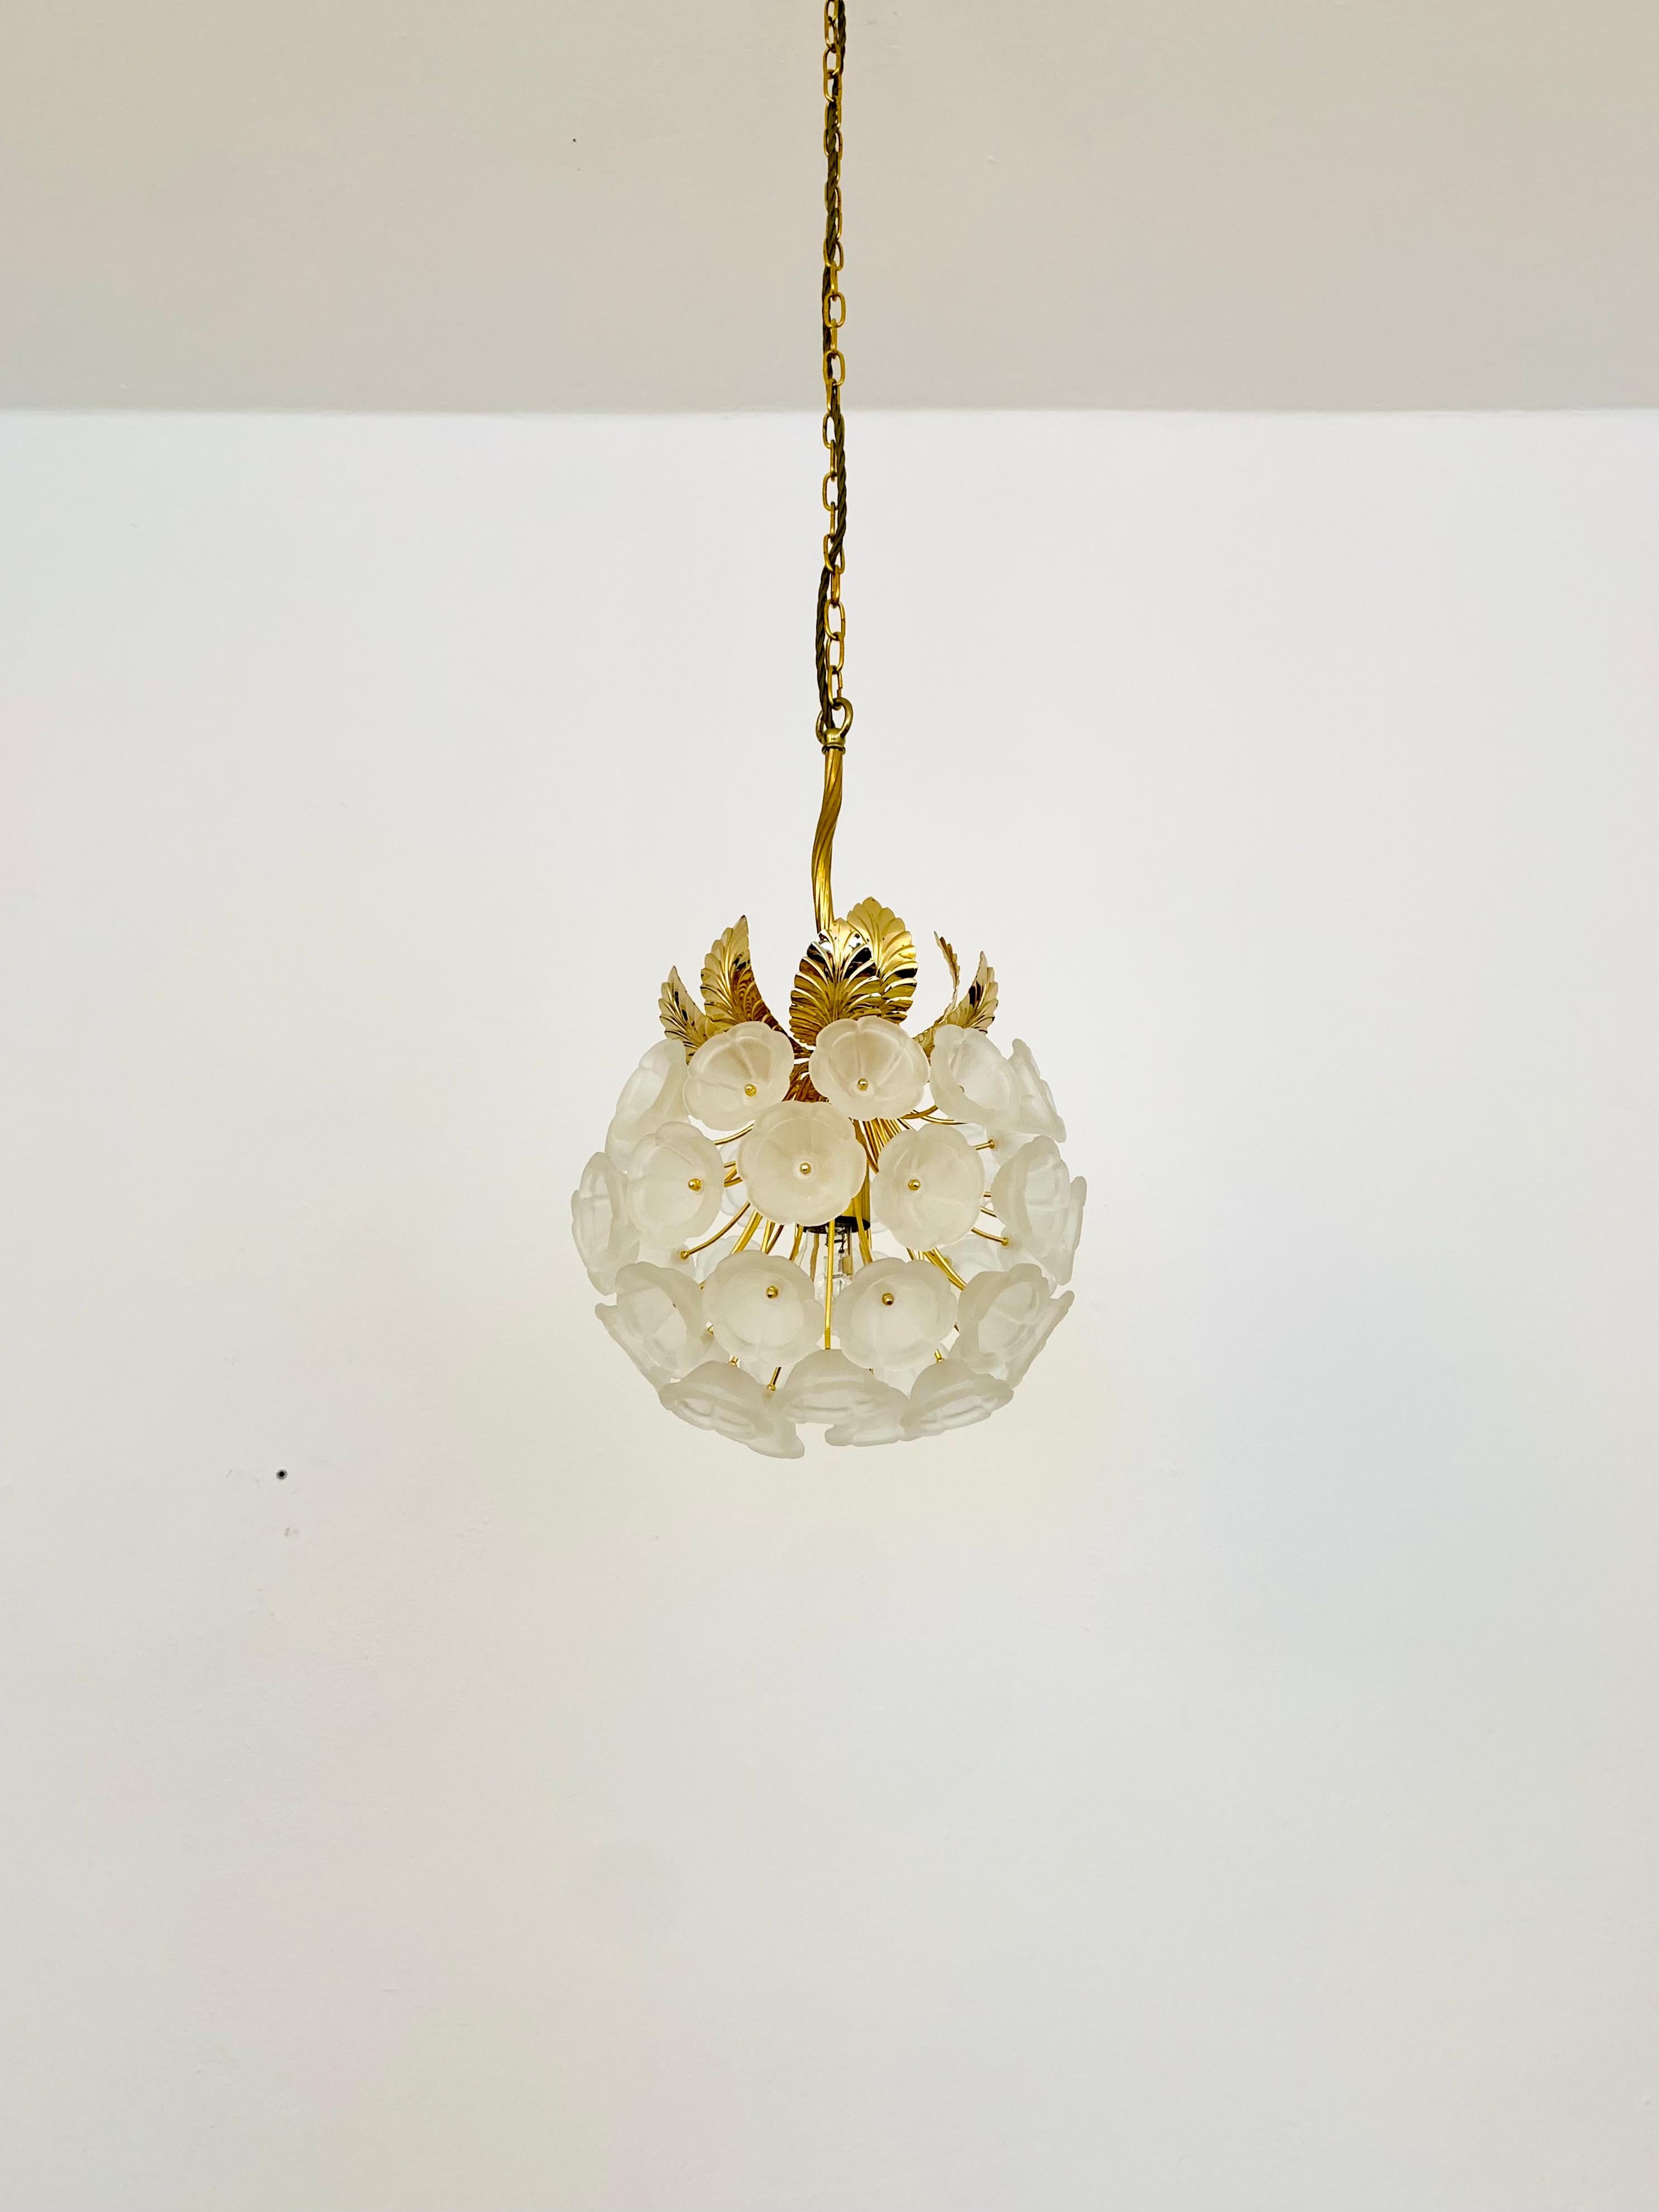 Extremely beautiful and high quality floral chandelier from the 1960s.
The high-quality workmanship and the very elegant material impress at first glance.
Exceptionally beautiful design.
The crystals spread a spectacular play of light in the